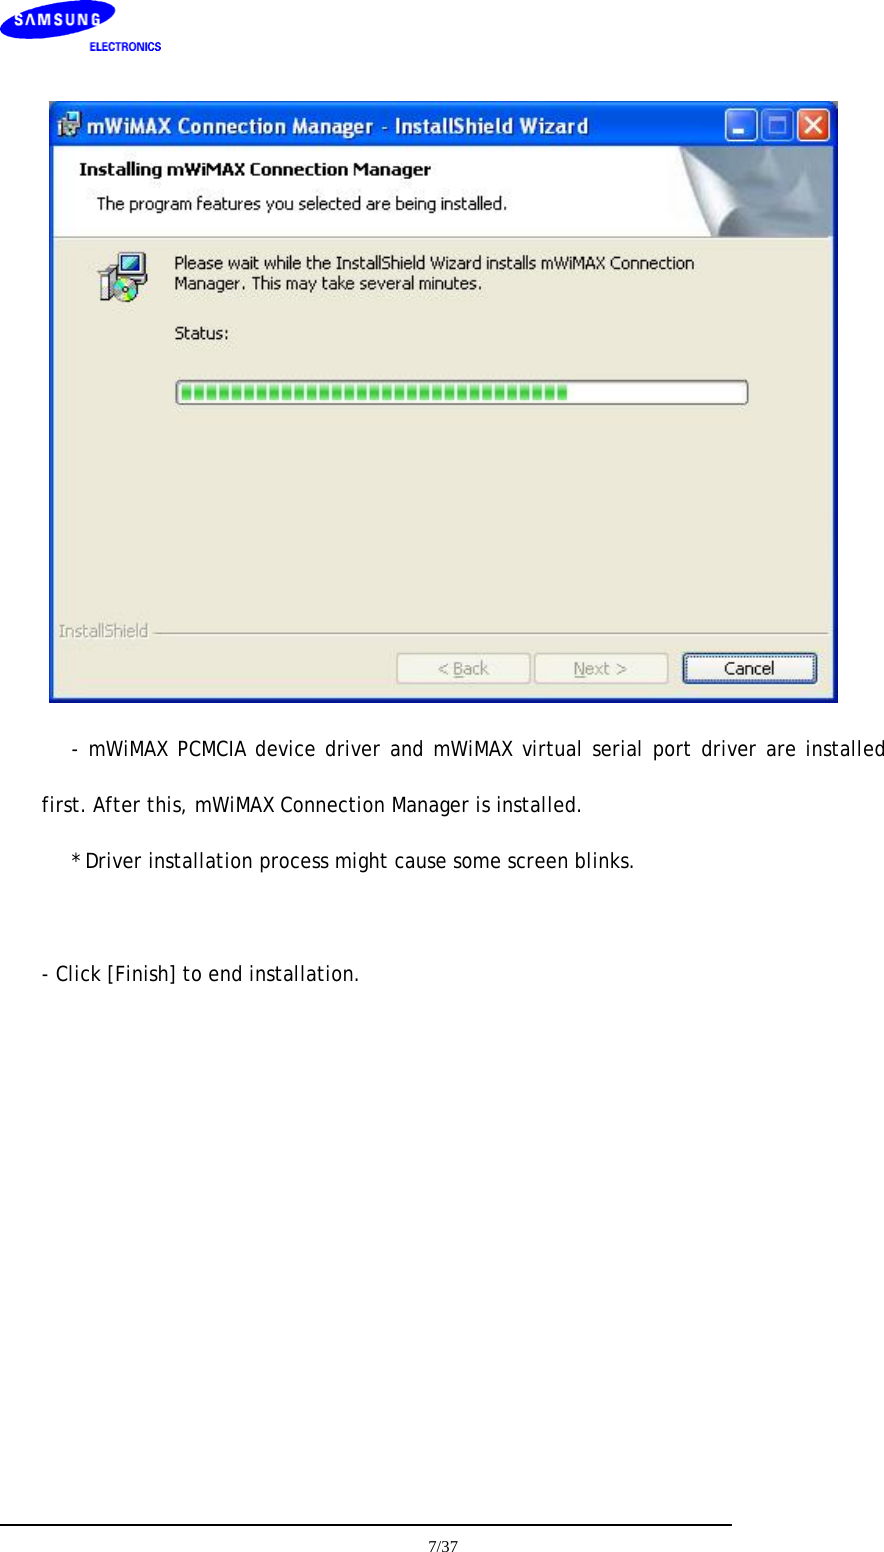     - mWiMAX PCMCIA device driver and mWiMAX virtual serial port driver are installed first. After this, mWiMAX Connection Manager is installed.  * Driver installation process might cause some screen blinks.  - Click [Finish] to end installation.  7/37  